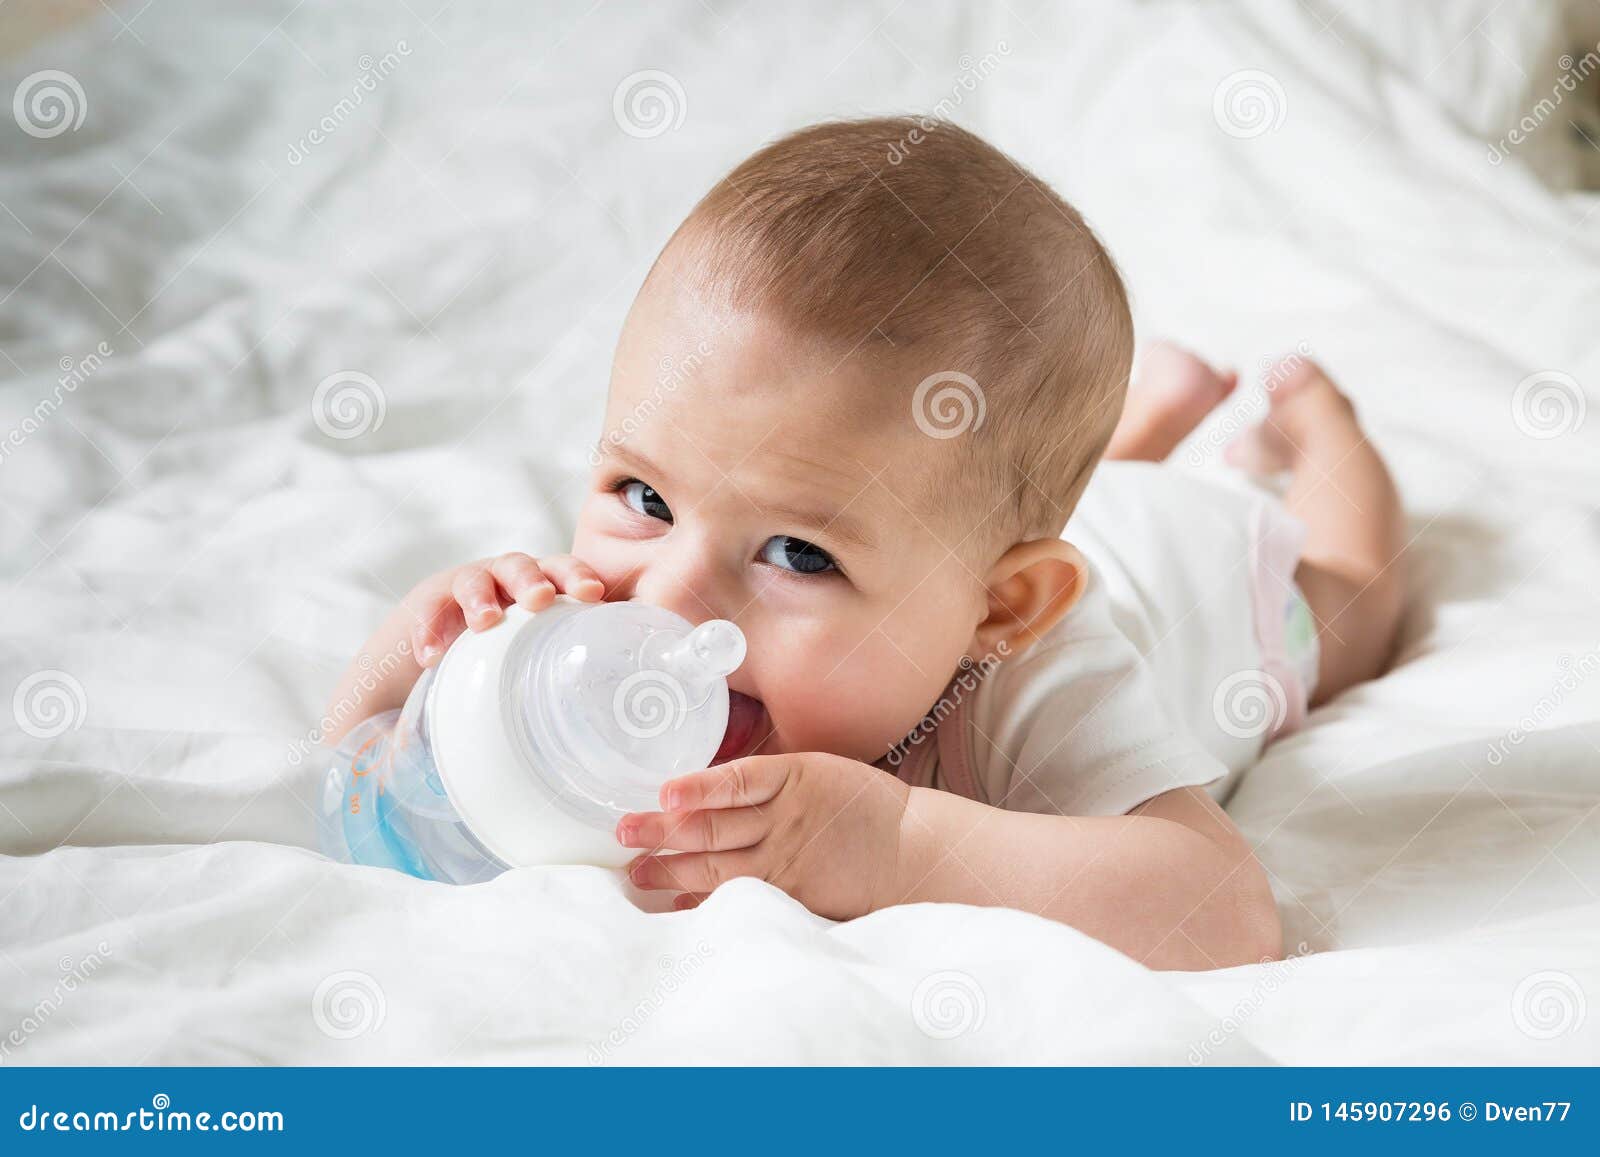 happy baby in white clothes on a white bed. drink water from the special bottle. close up, infant leer. tricky glance